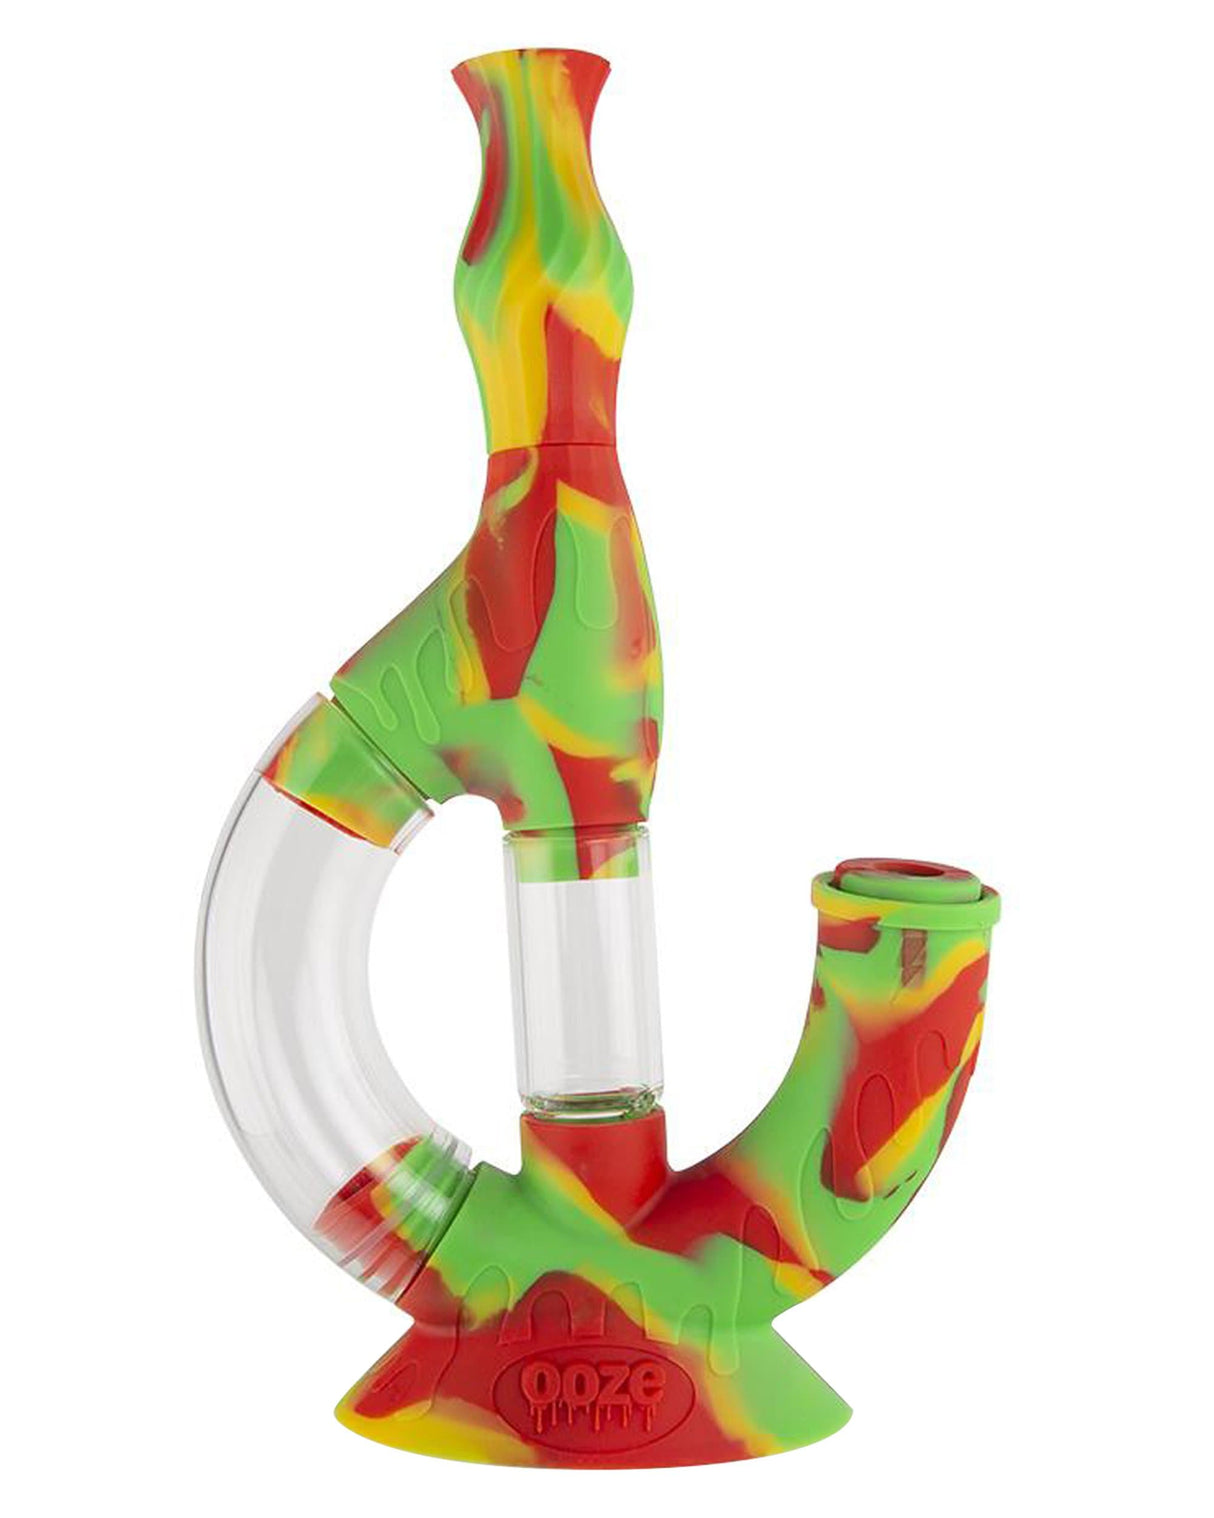 Ooze Echo 4-in-1 Silicone Bong in vibrant red, green, and yellow, with clear glass chamber, front view.